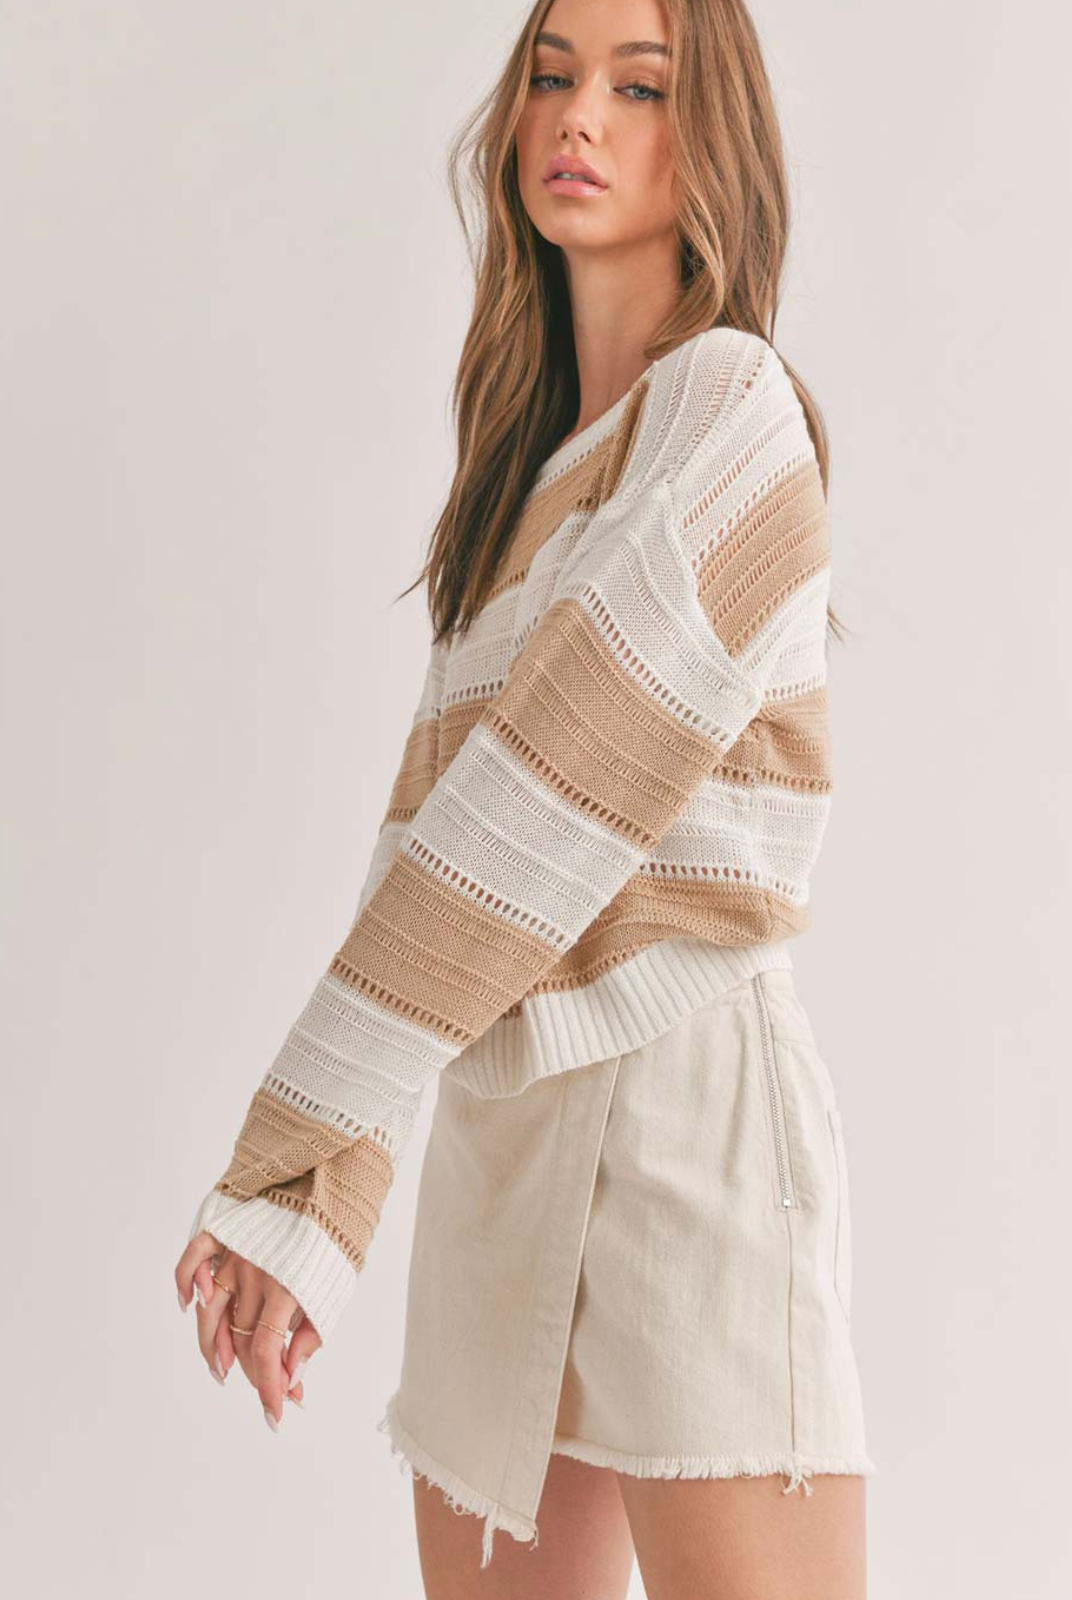 Sage The Label Lucia Striped Sweater. Knit Sweater 100% Acrylic